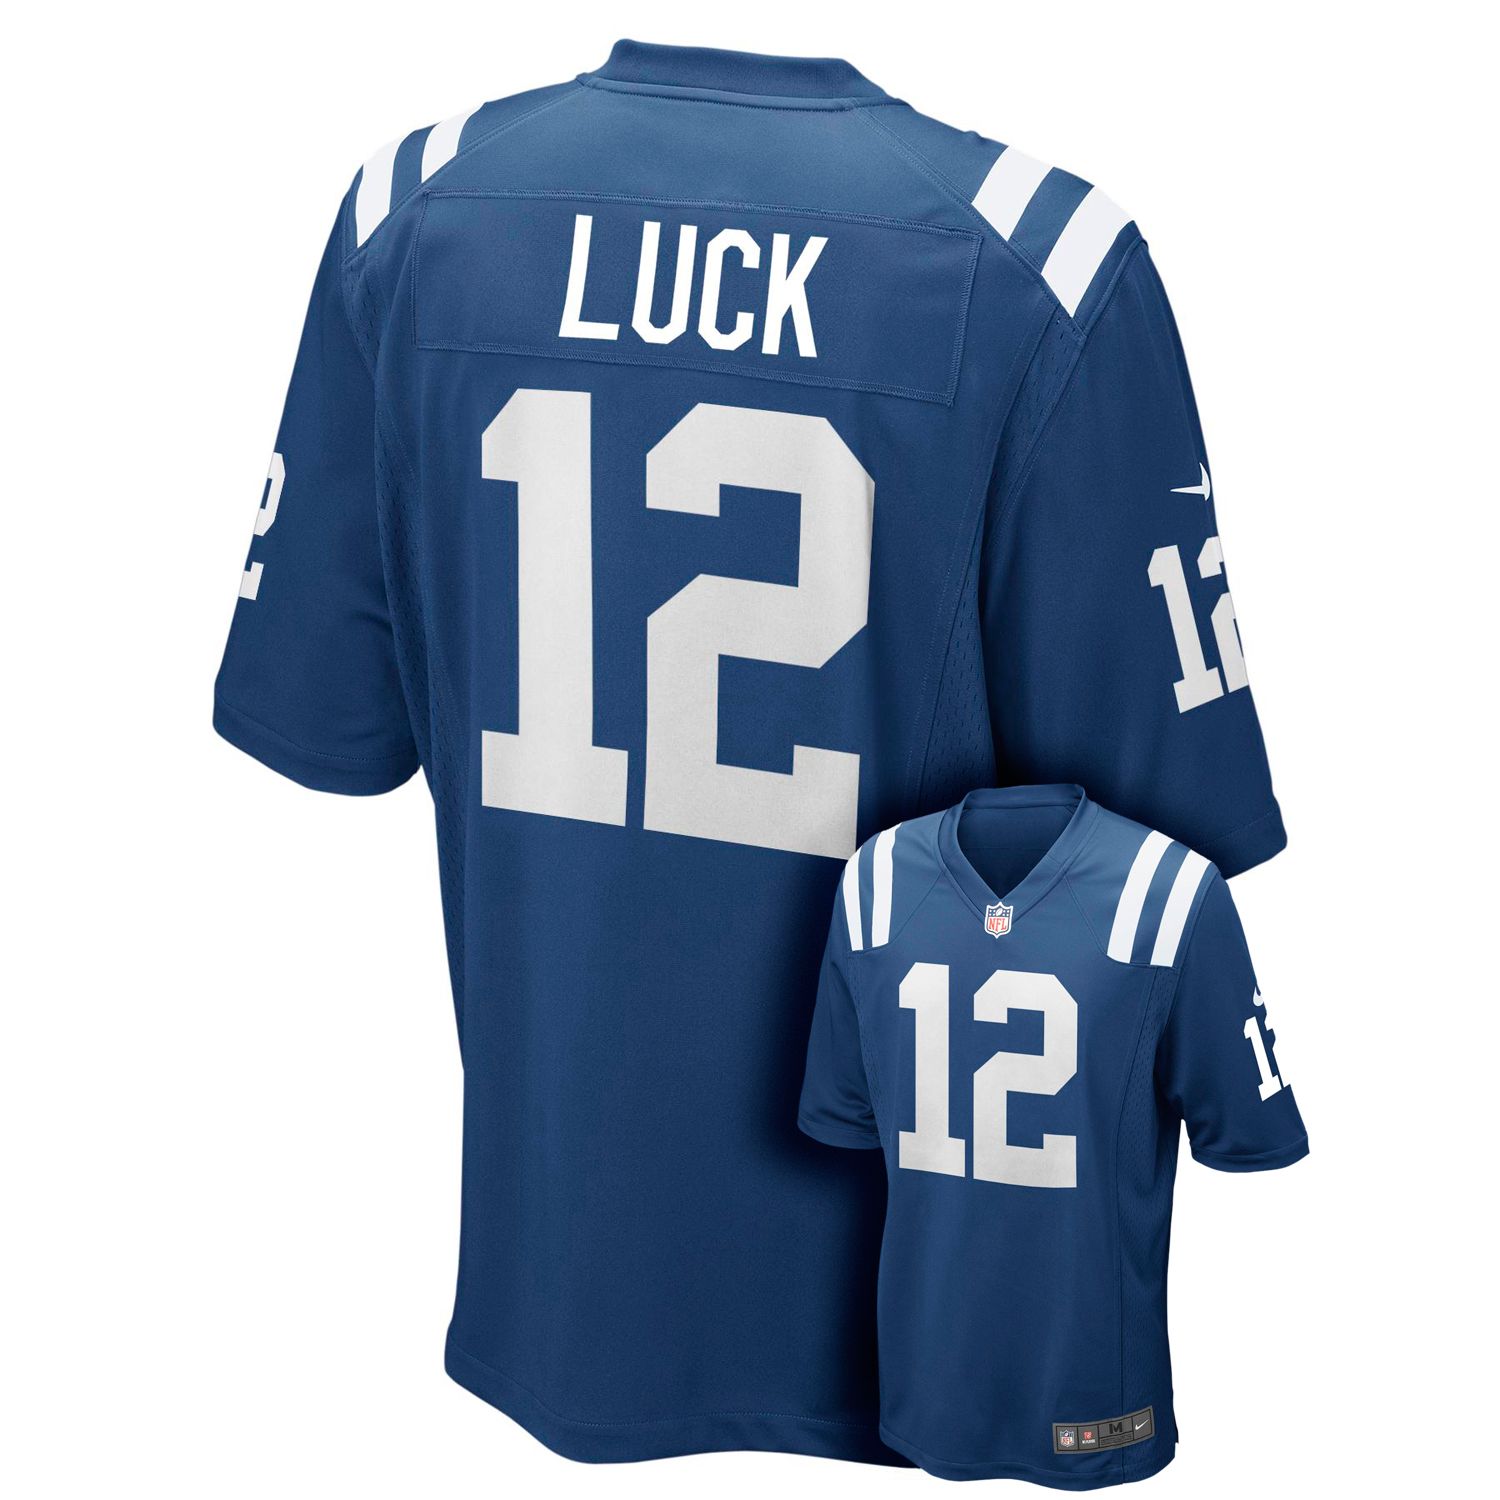 indianapolis colts andrew luck jersey